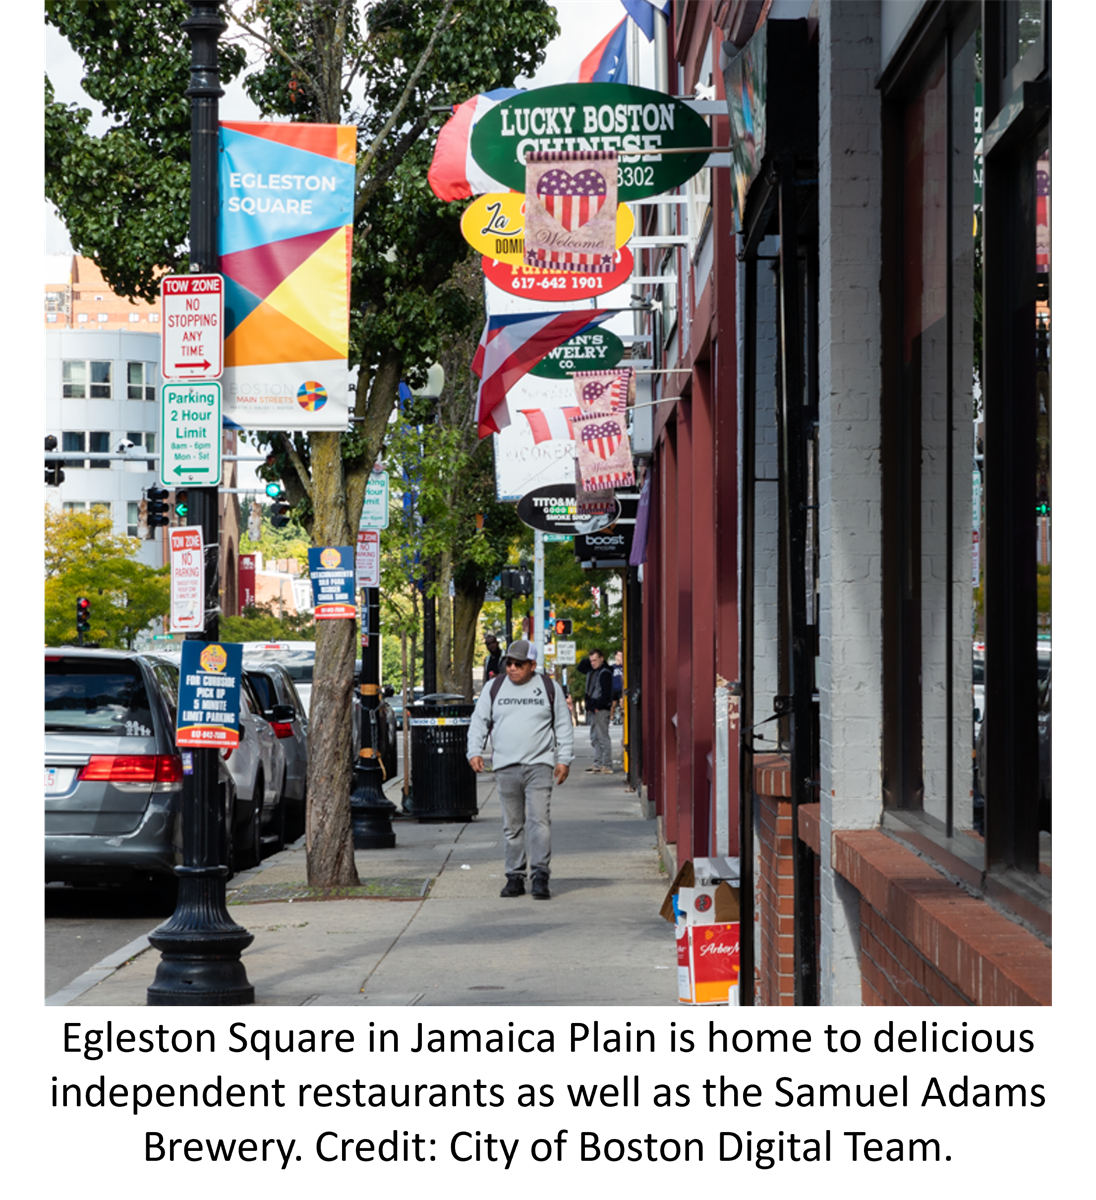 Egleston Square in Jamaica Plain is home to delicious independent restaurants as well as the Samuel Adams Brewery. Credit: City of Boston Digital Team.